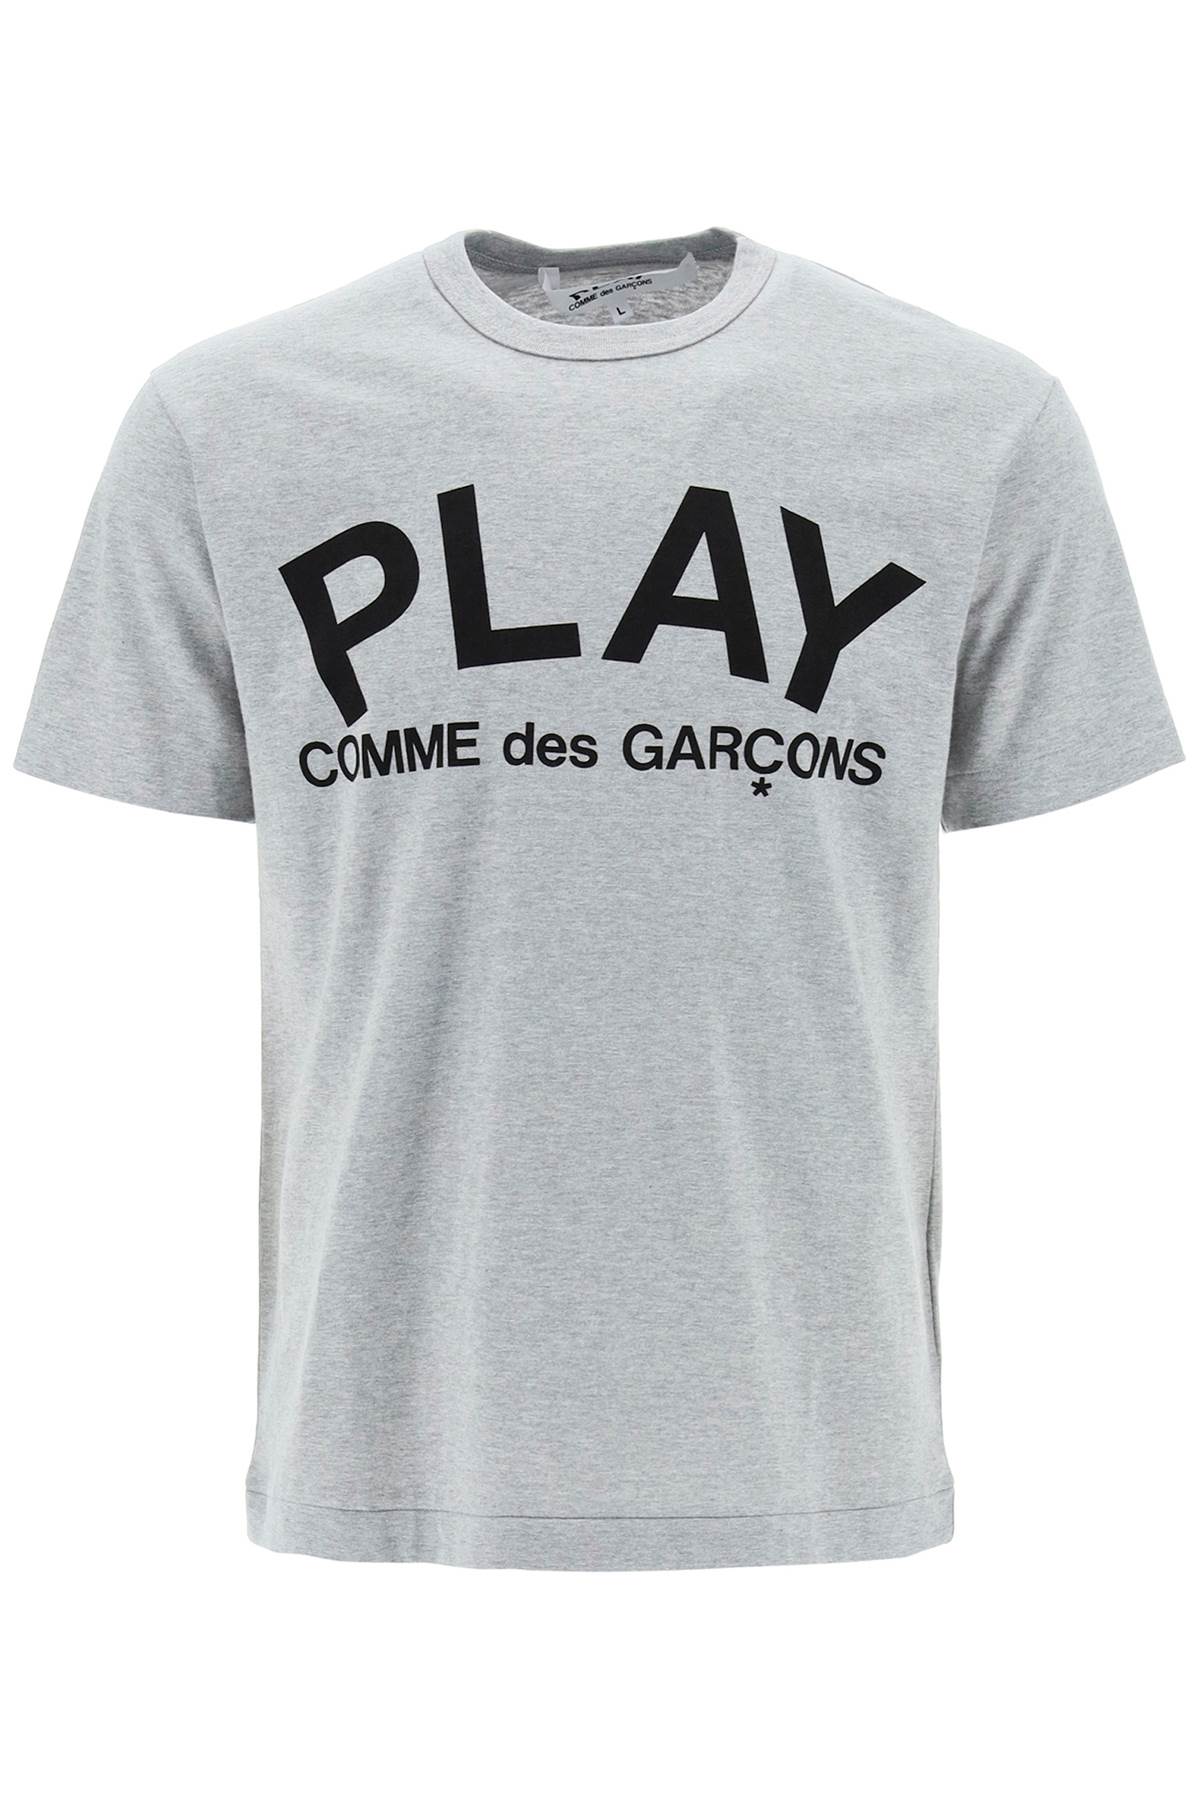 Comme des garcons play t-shirt with play print-0